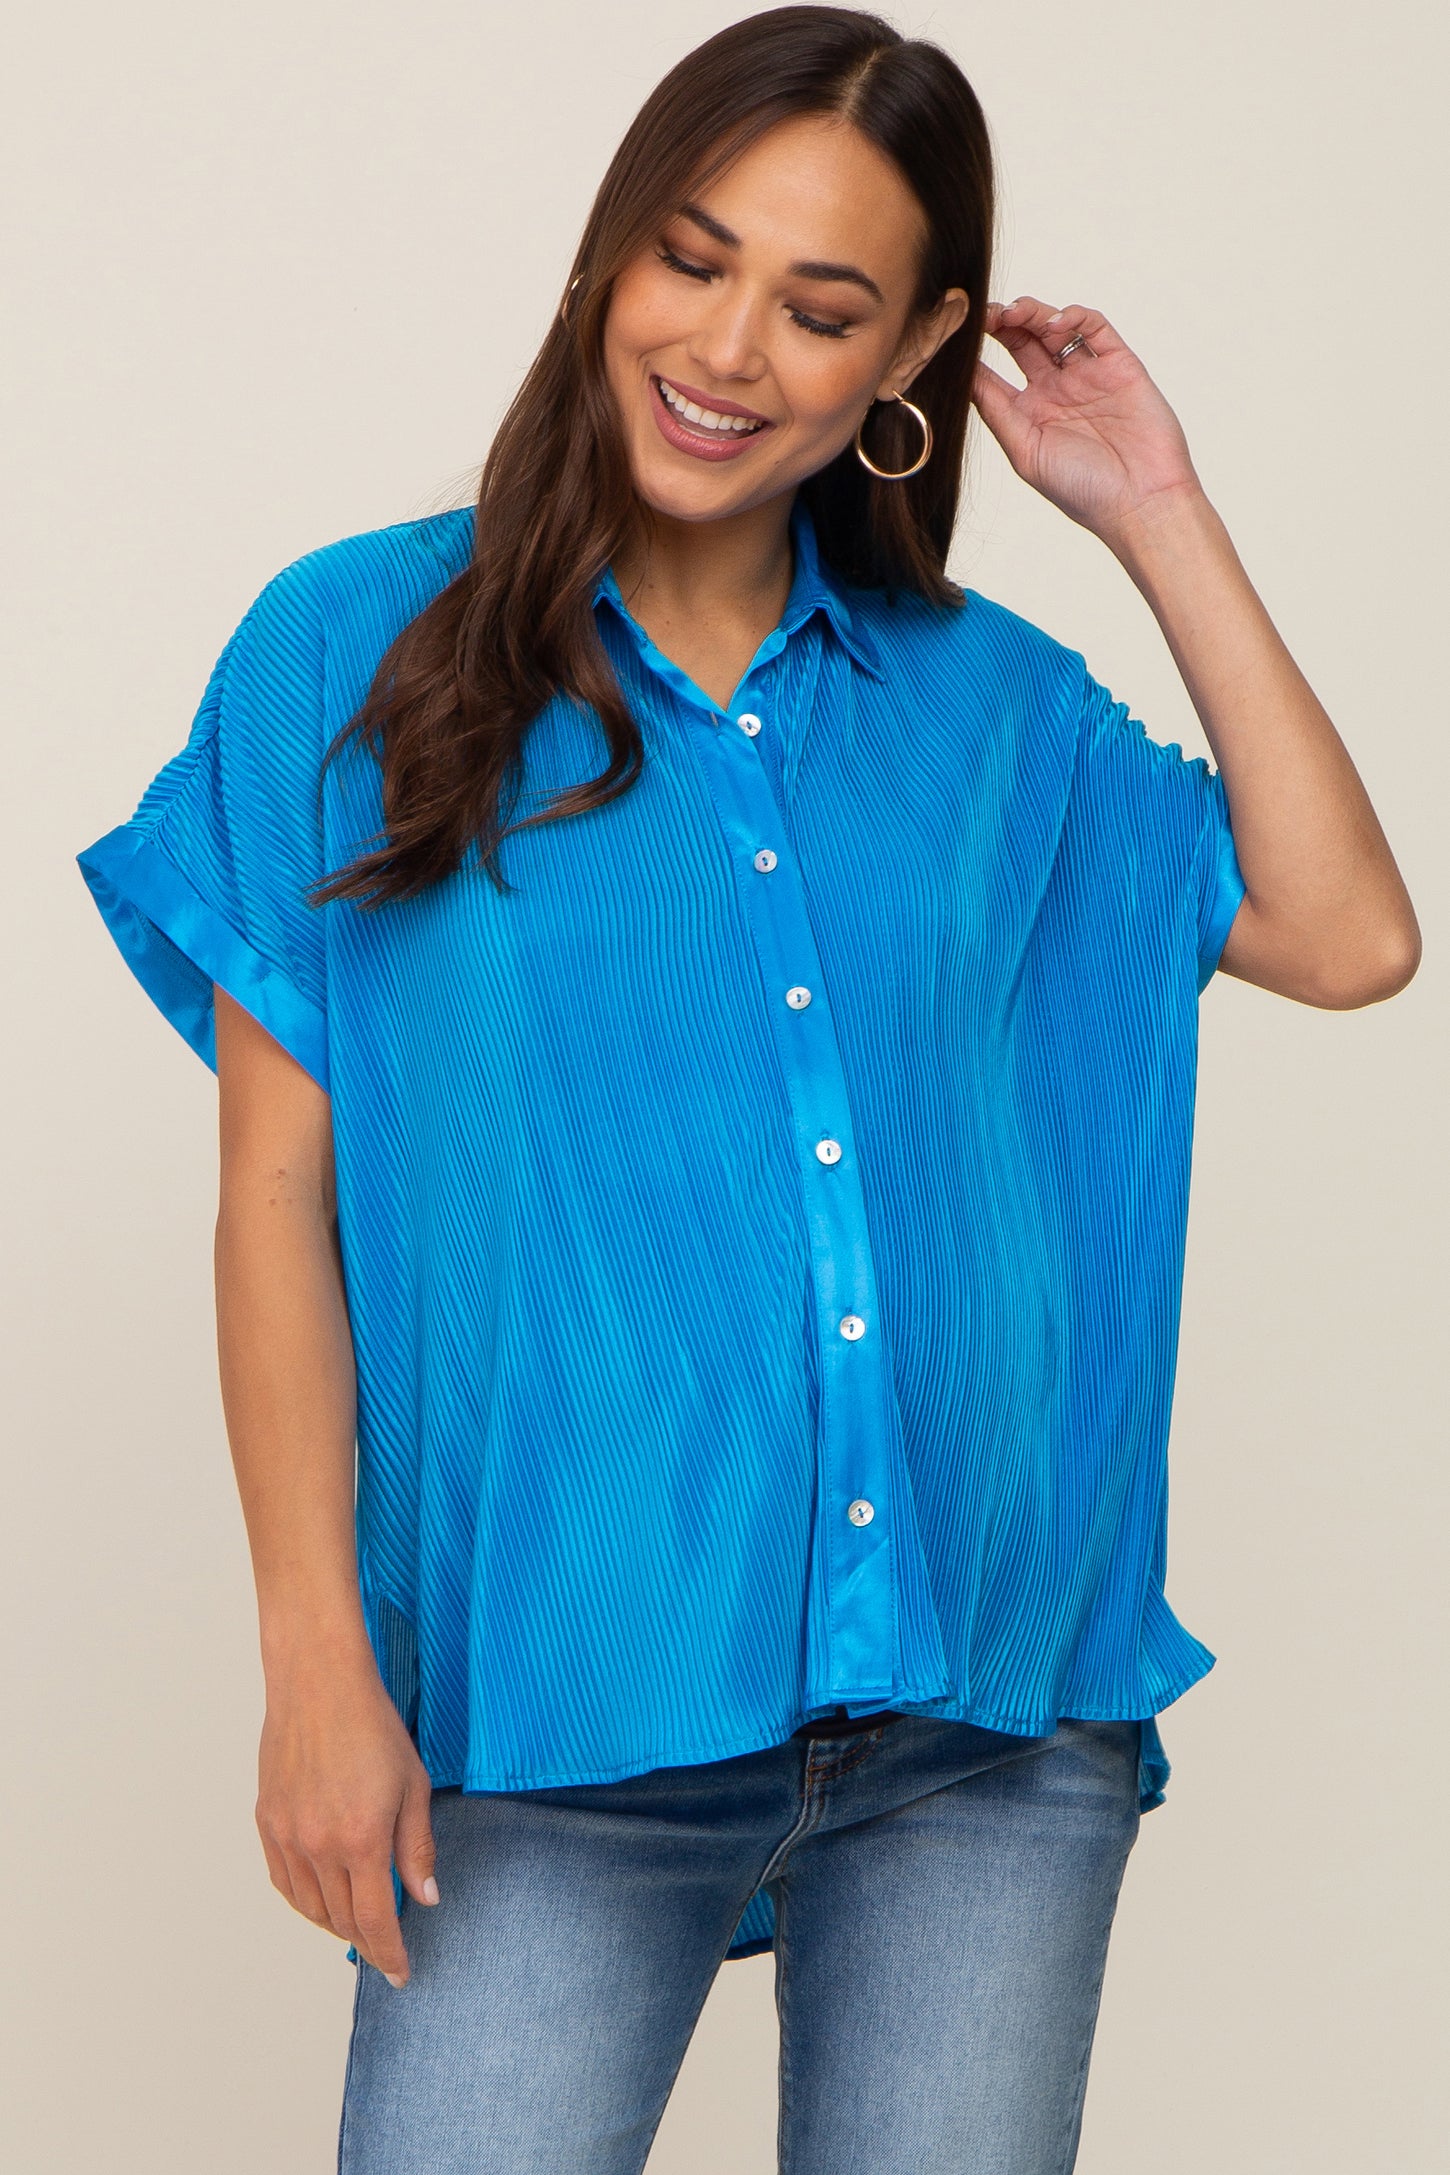 Blue Pleated Satin Button Up Maternity Top